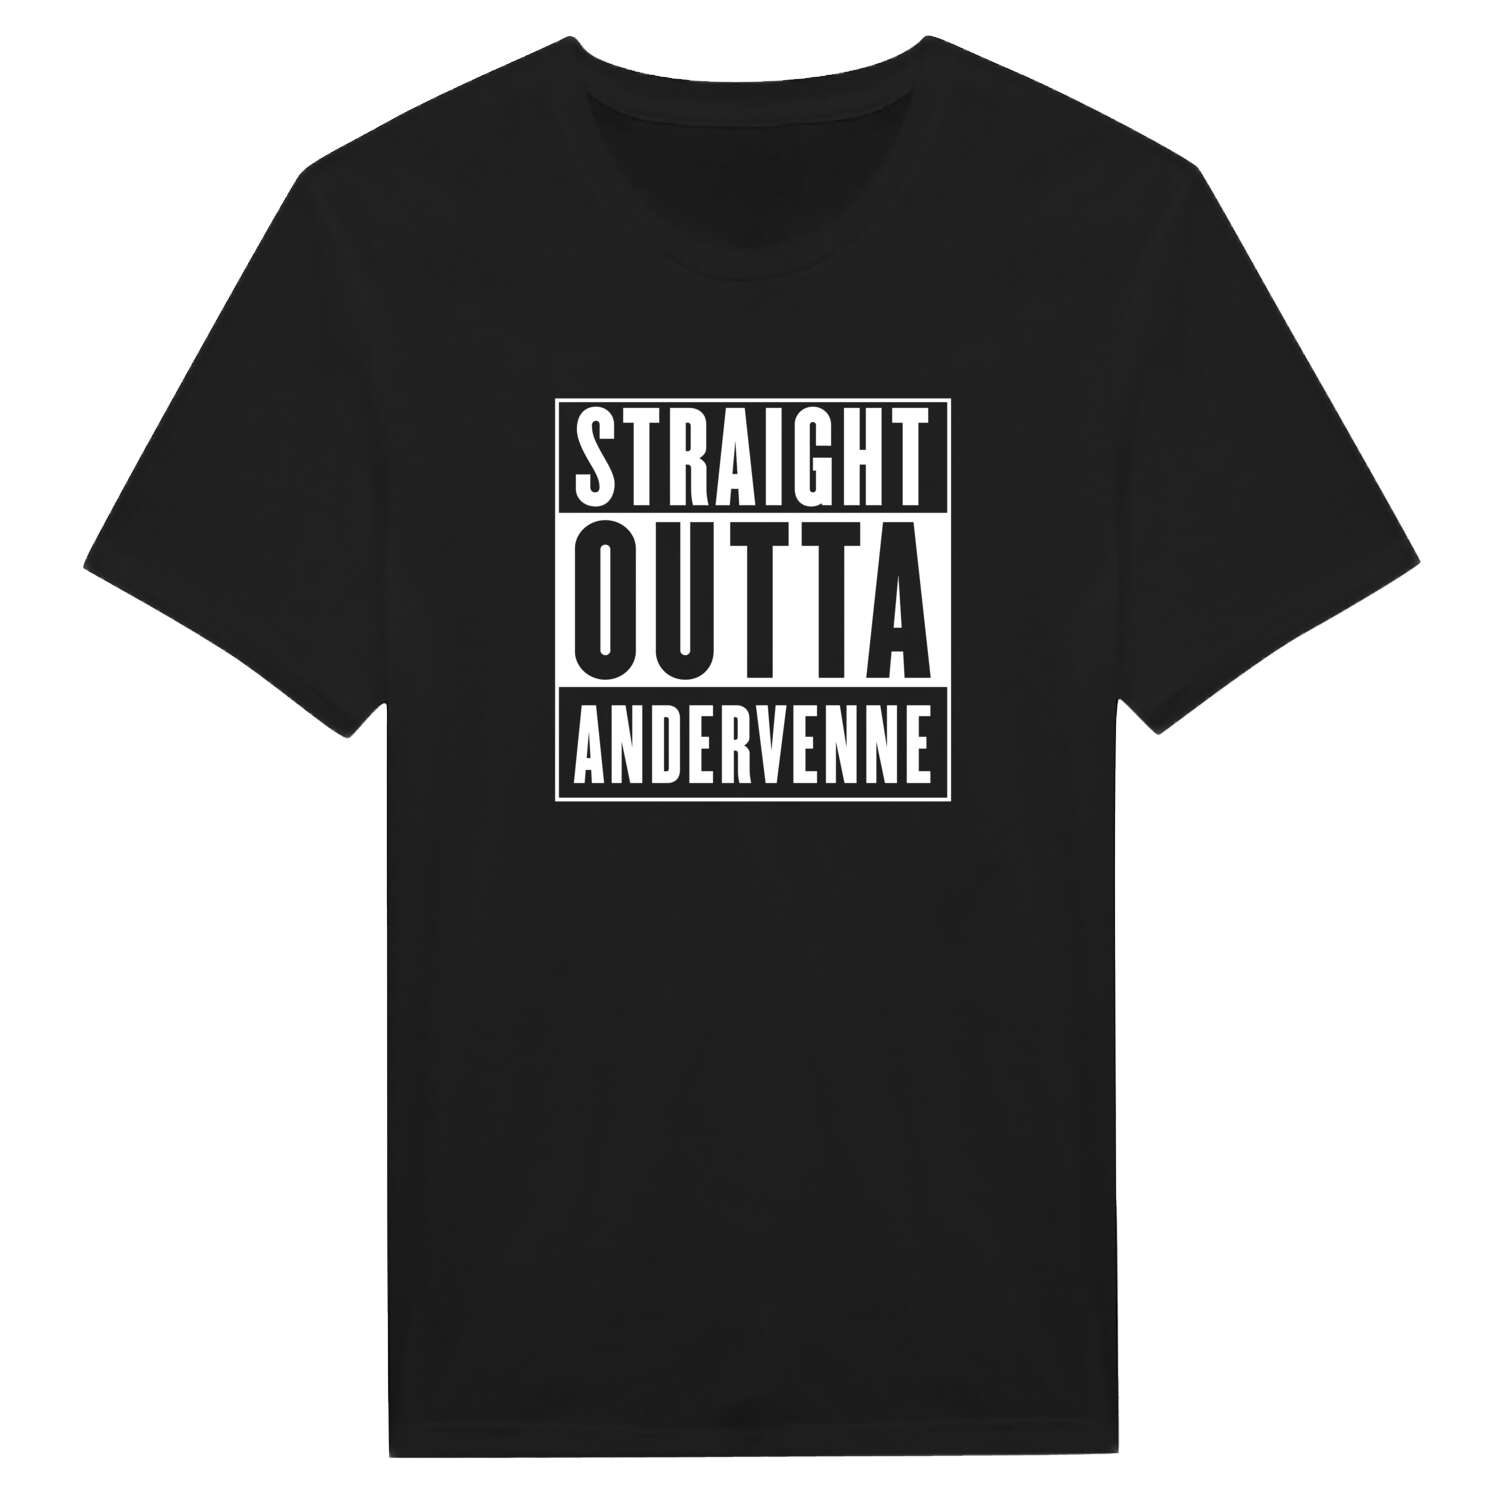 Andervenne T-Shirt »Straight Outta«